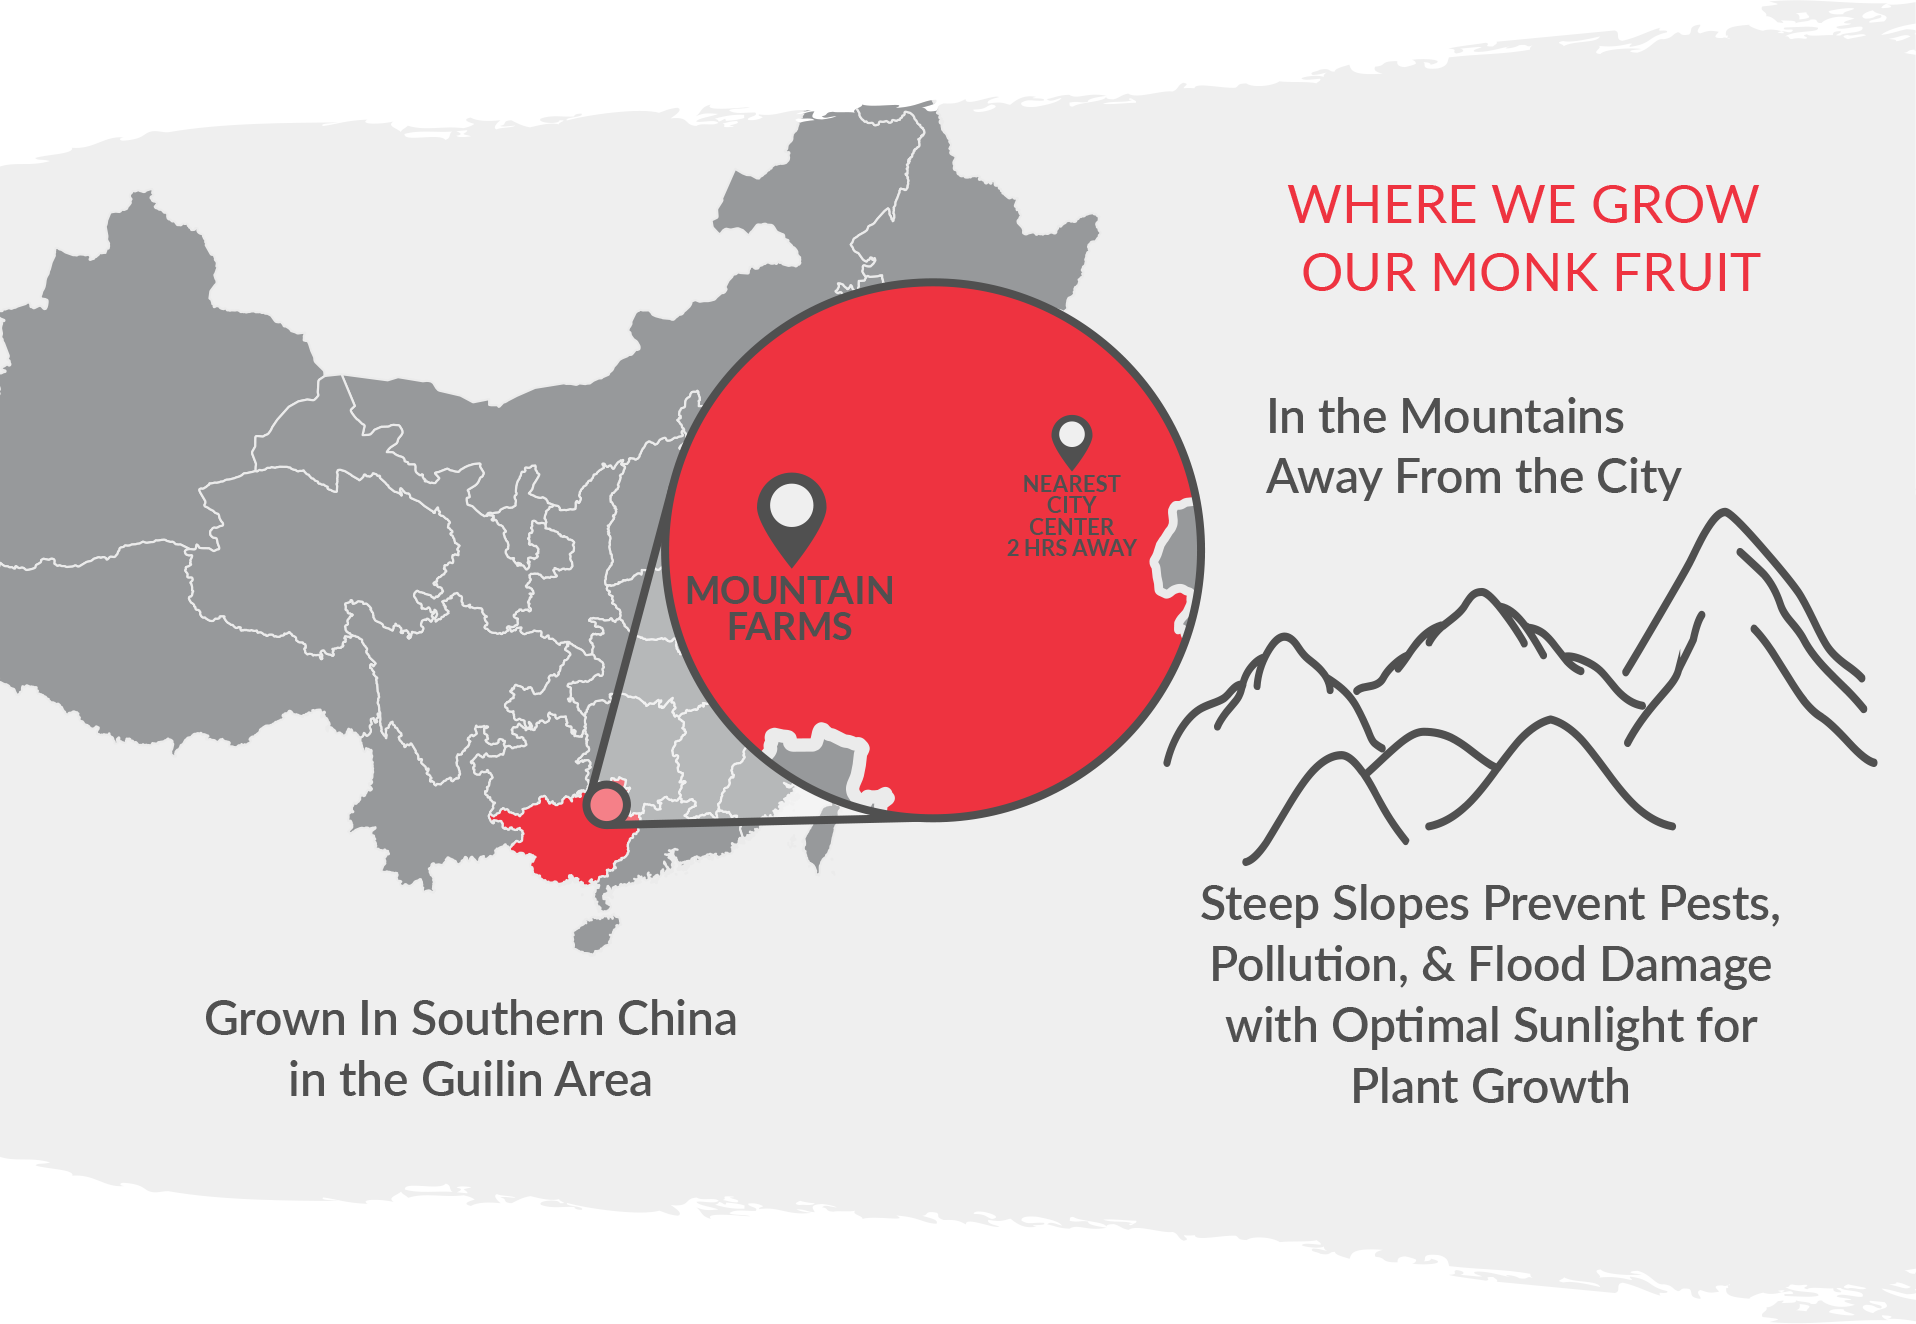 Monk fruit is grown in the mountains for Southern China (away from the city)